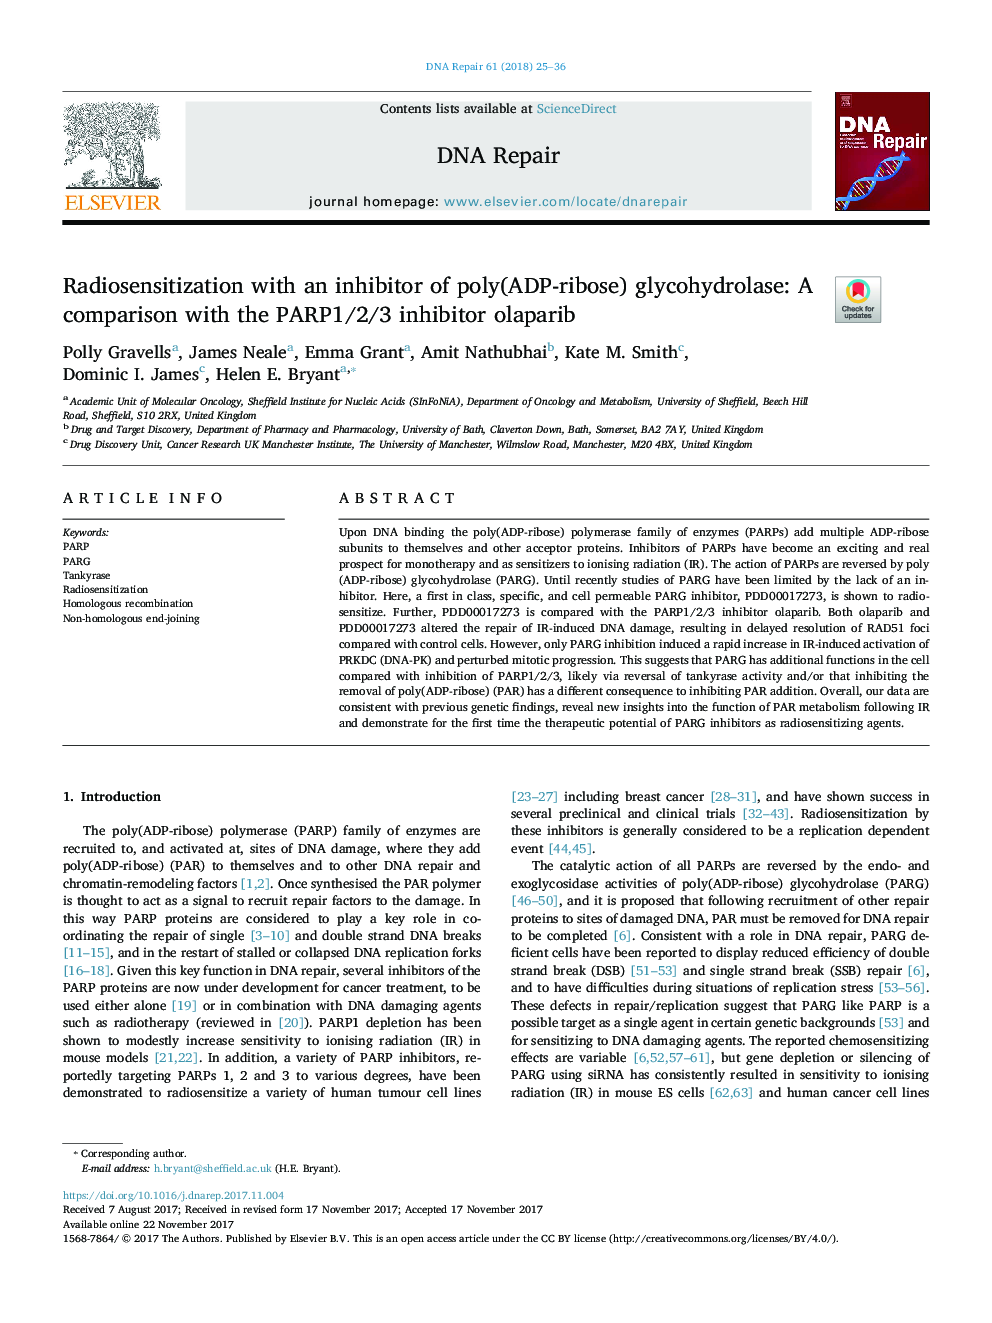 Radiosensitization with an inhibitor of poly(ADP-ribose) glycohydrolase: A comparison with the PARP1/2/3 inhibitor olaparib